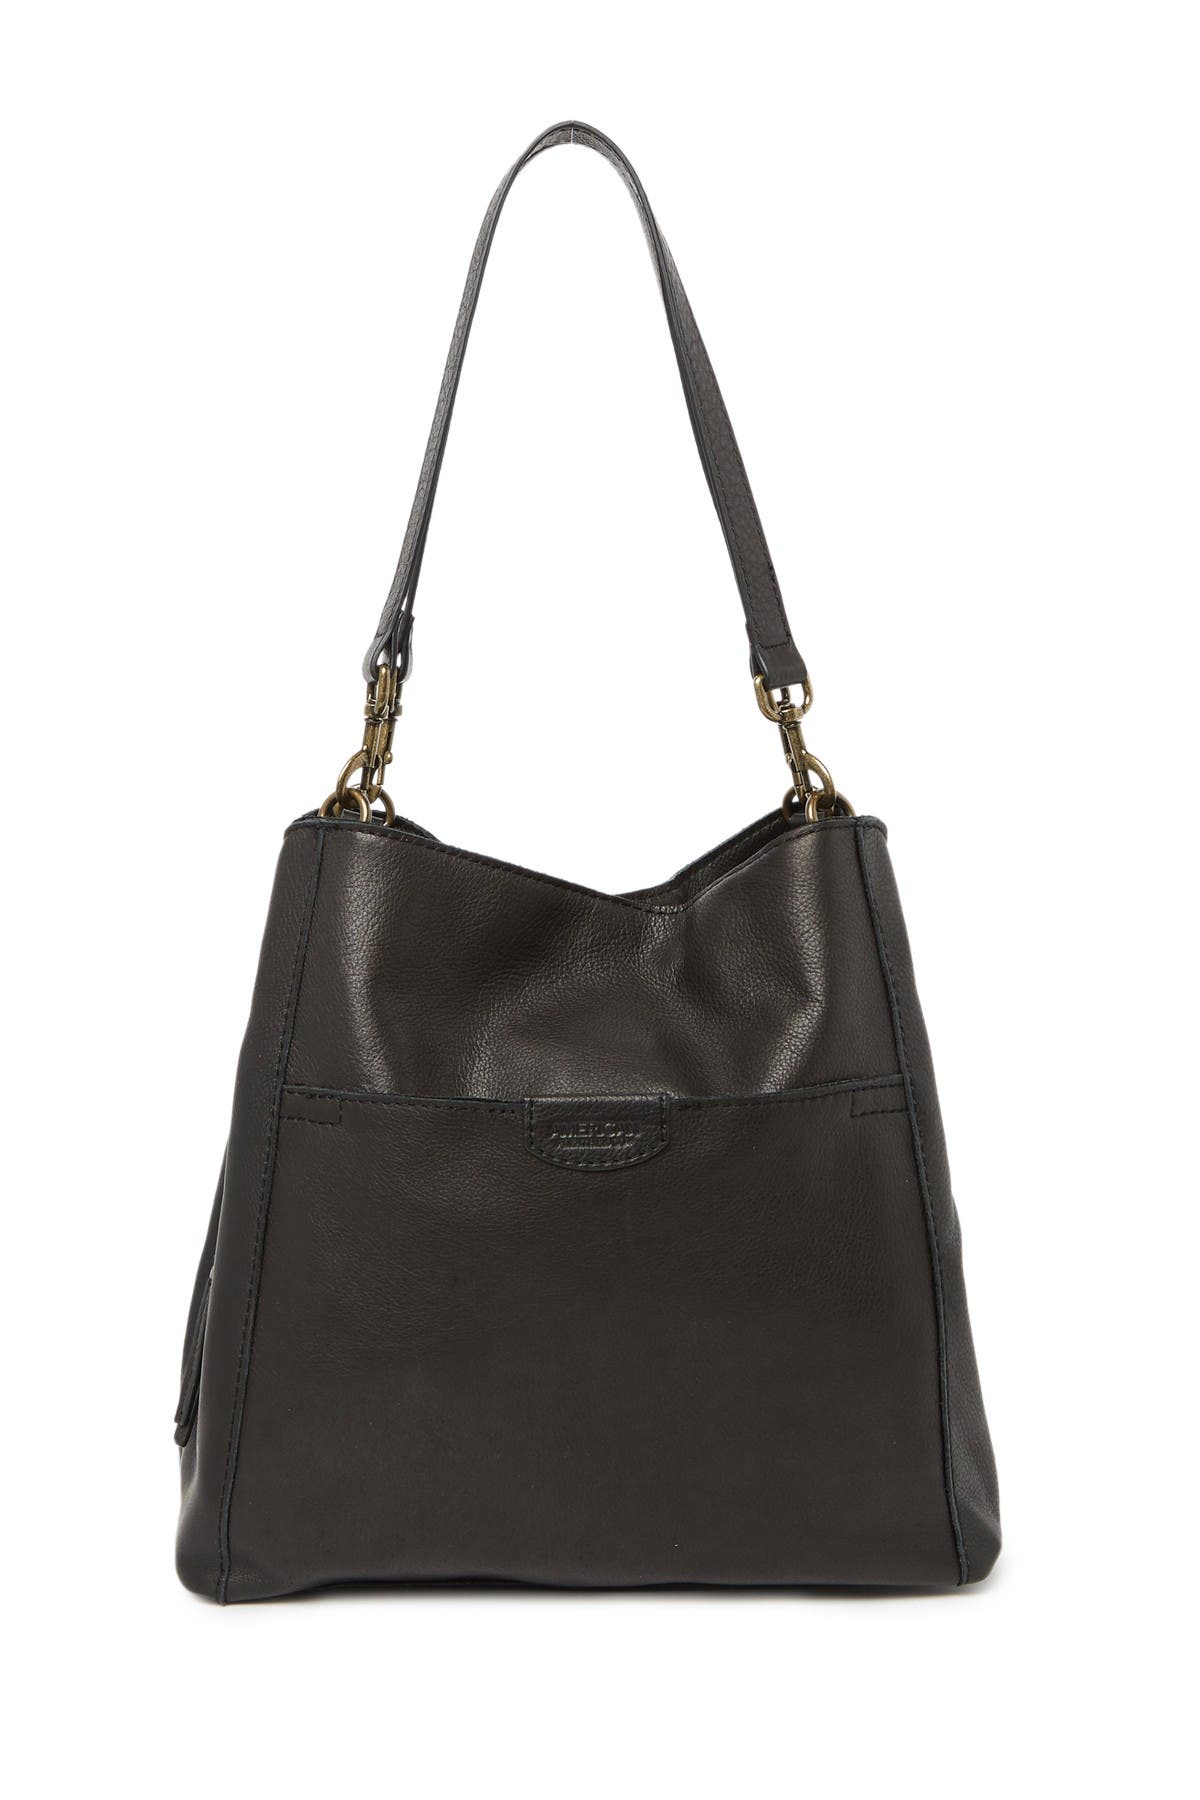 American Leather Co. Austin Leather Bucket Bag In Oxford1